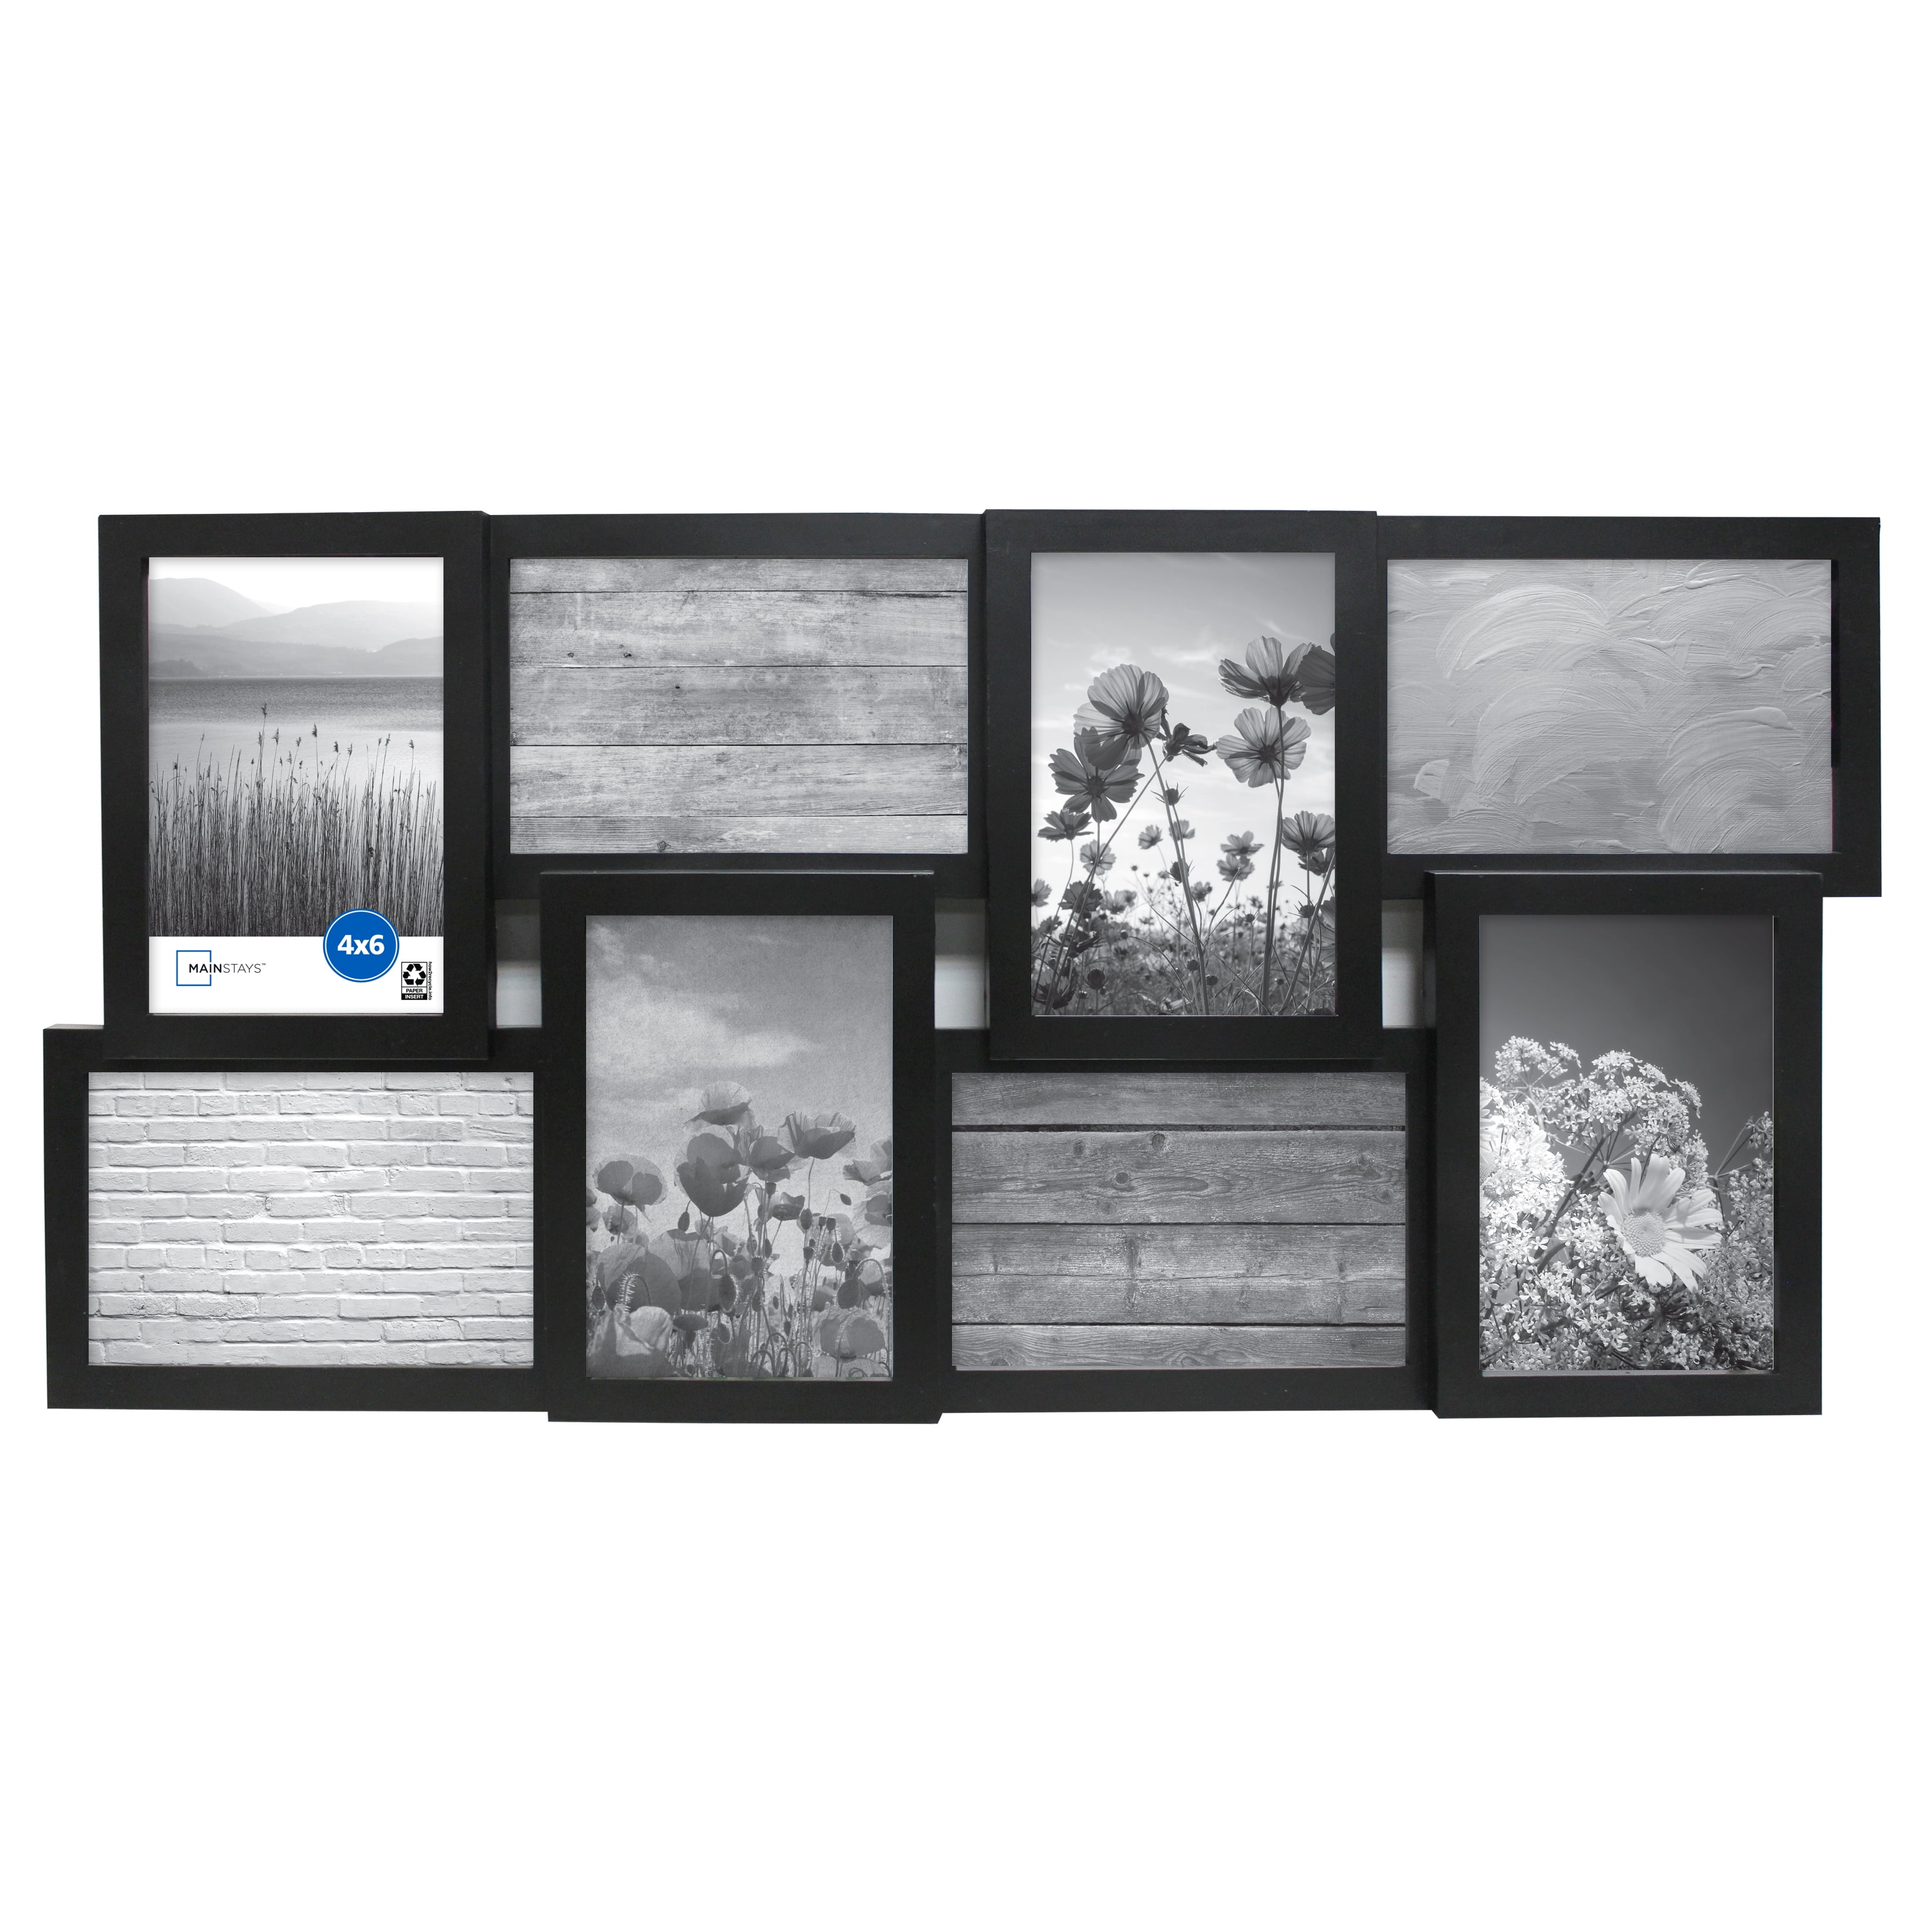 Details about   Mainstays MS 8-Opening 4” x 6” Linear White Collage Photo Frame Home Wall De 